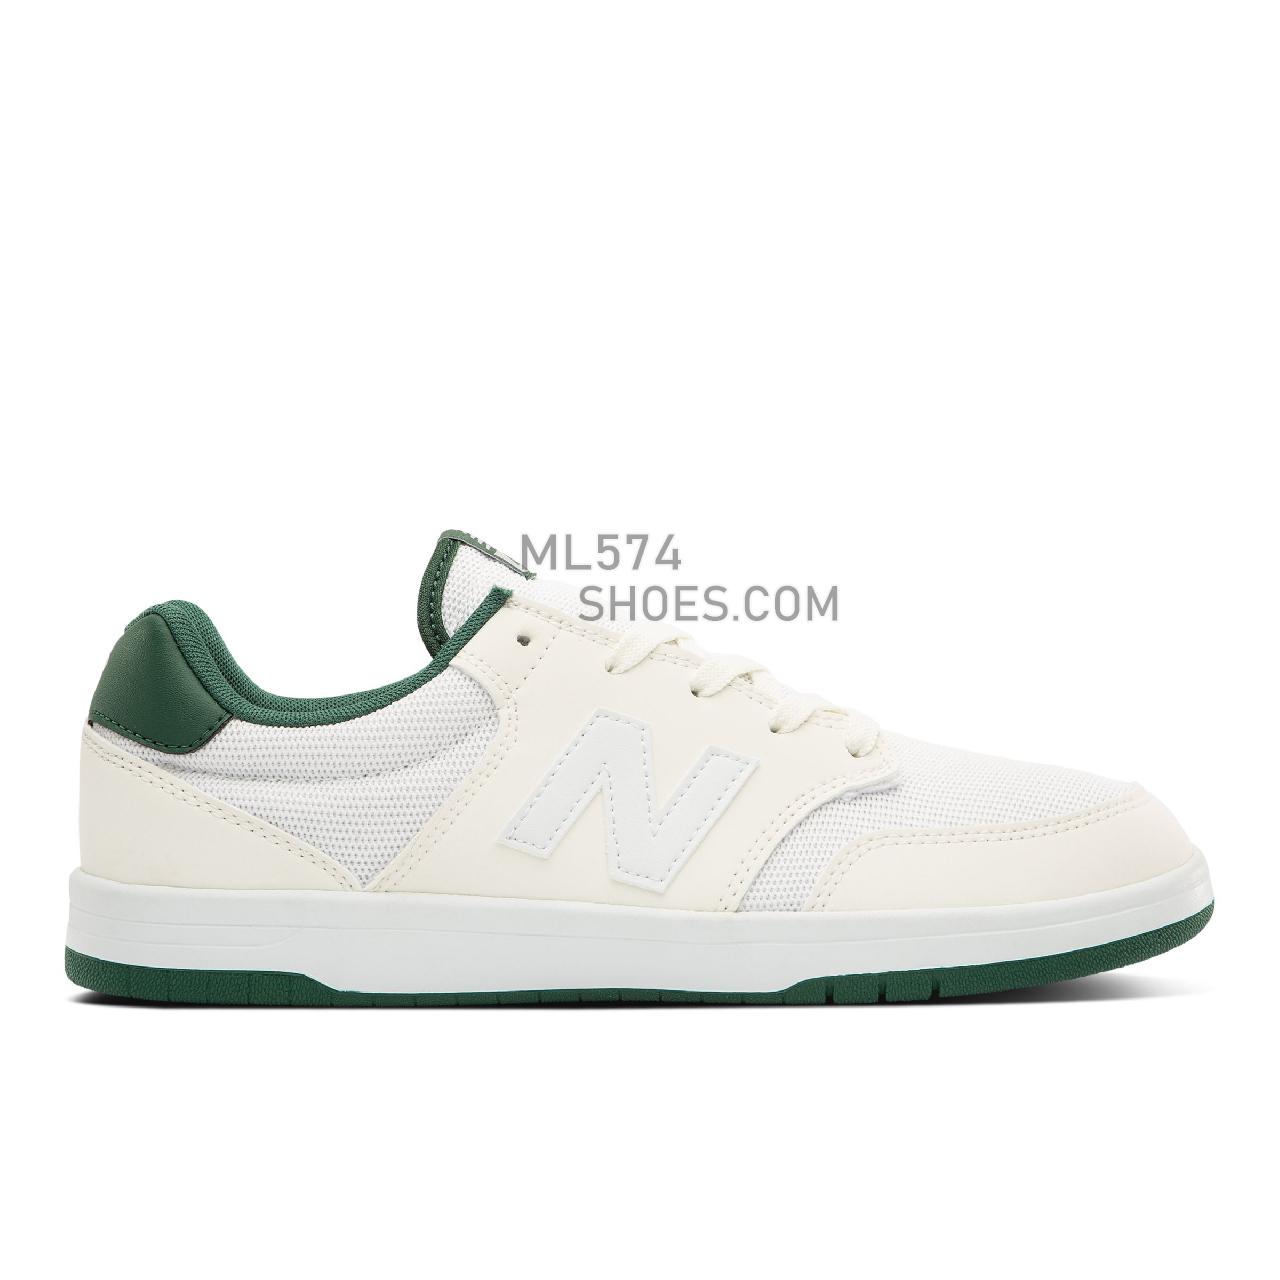 New Balance All Coasts AM425 - Men's Classic Sneakers - Grey with Green - AM425GRG